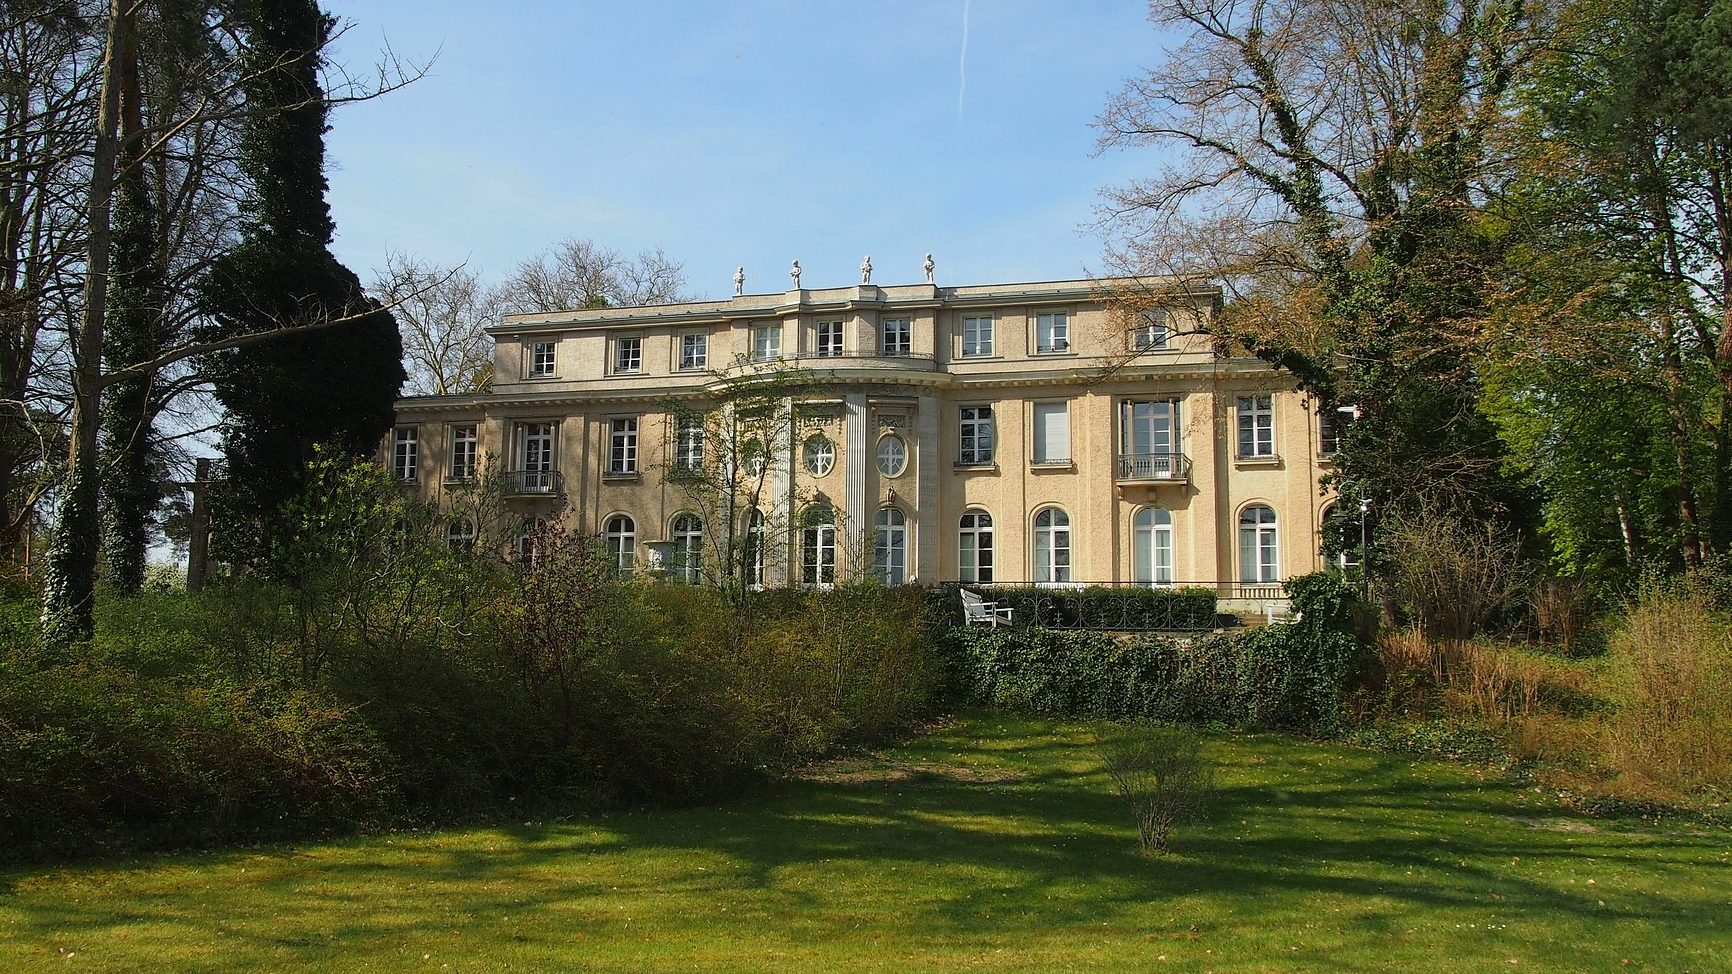 Hitler’s Vision: Wannsee’s Challenge